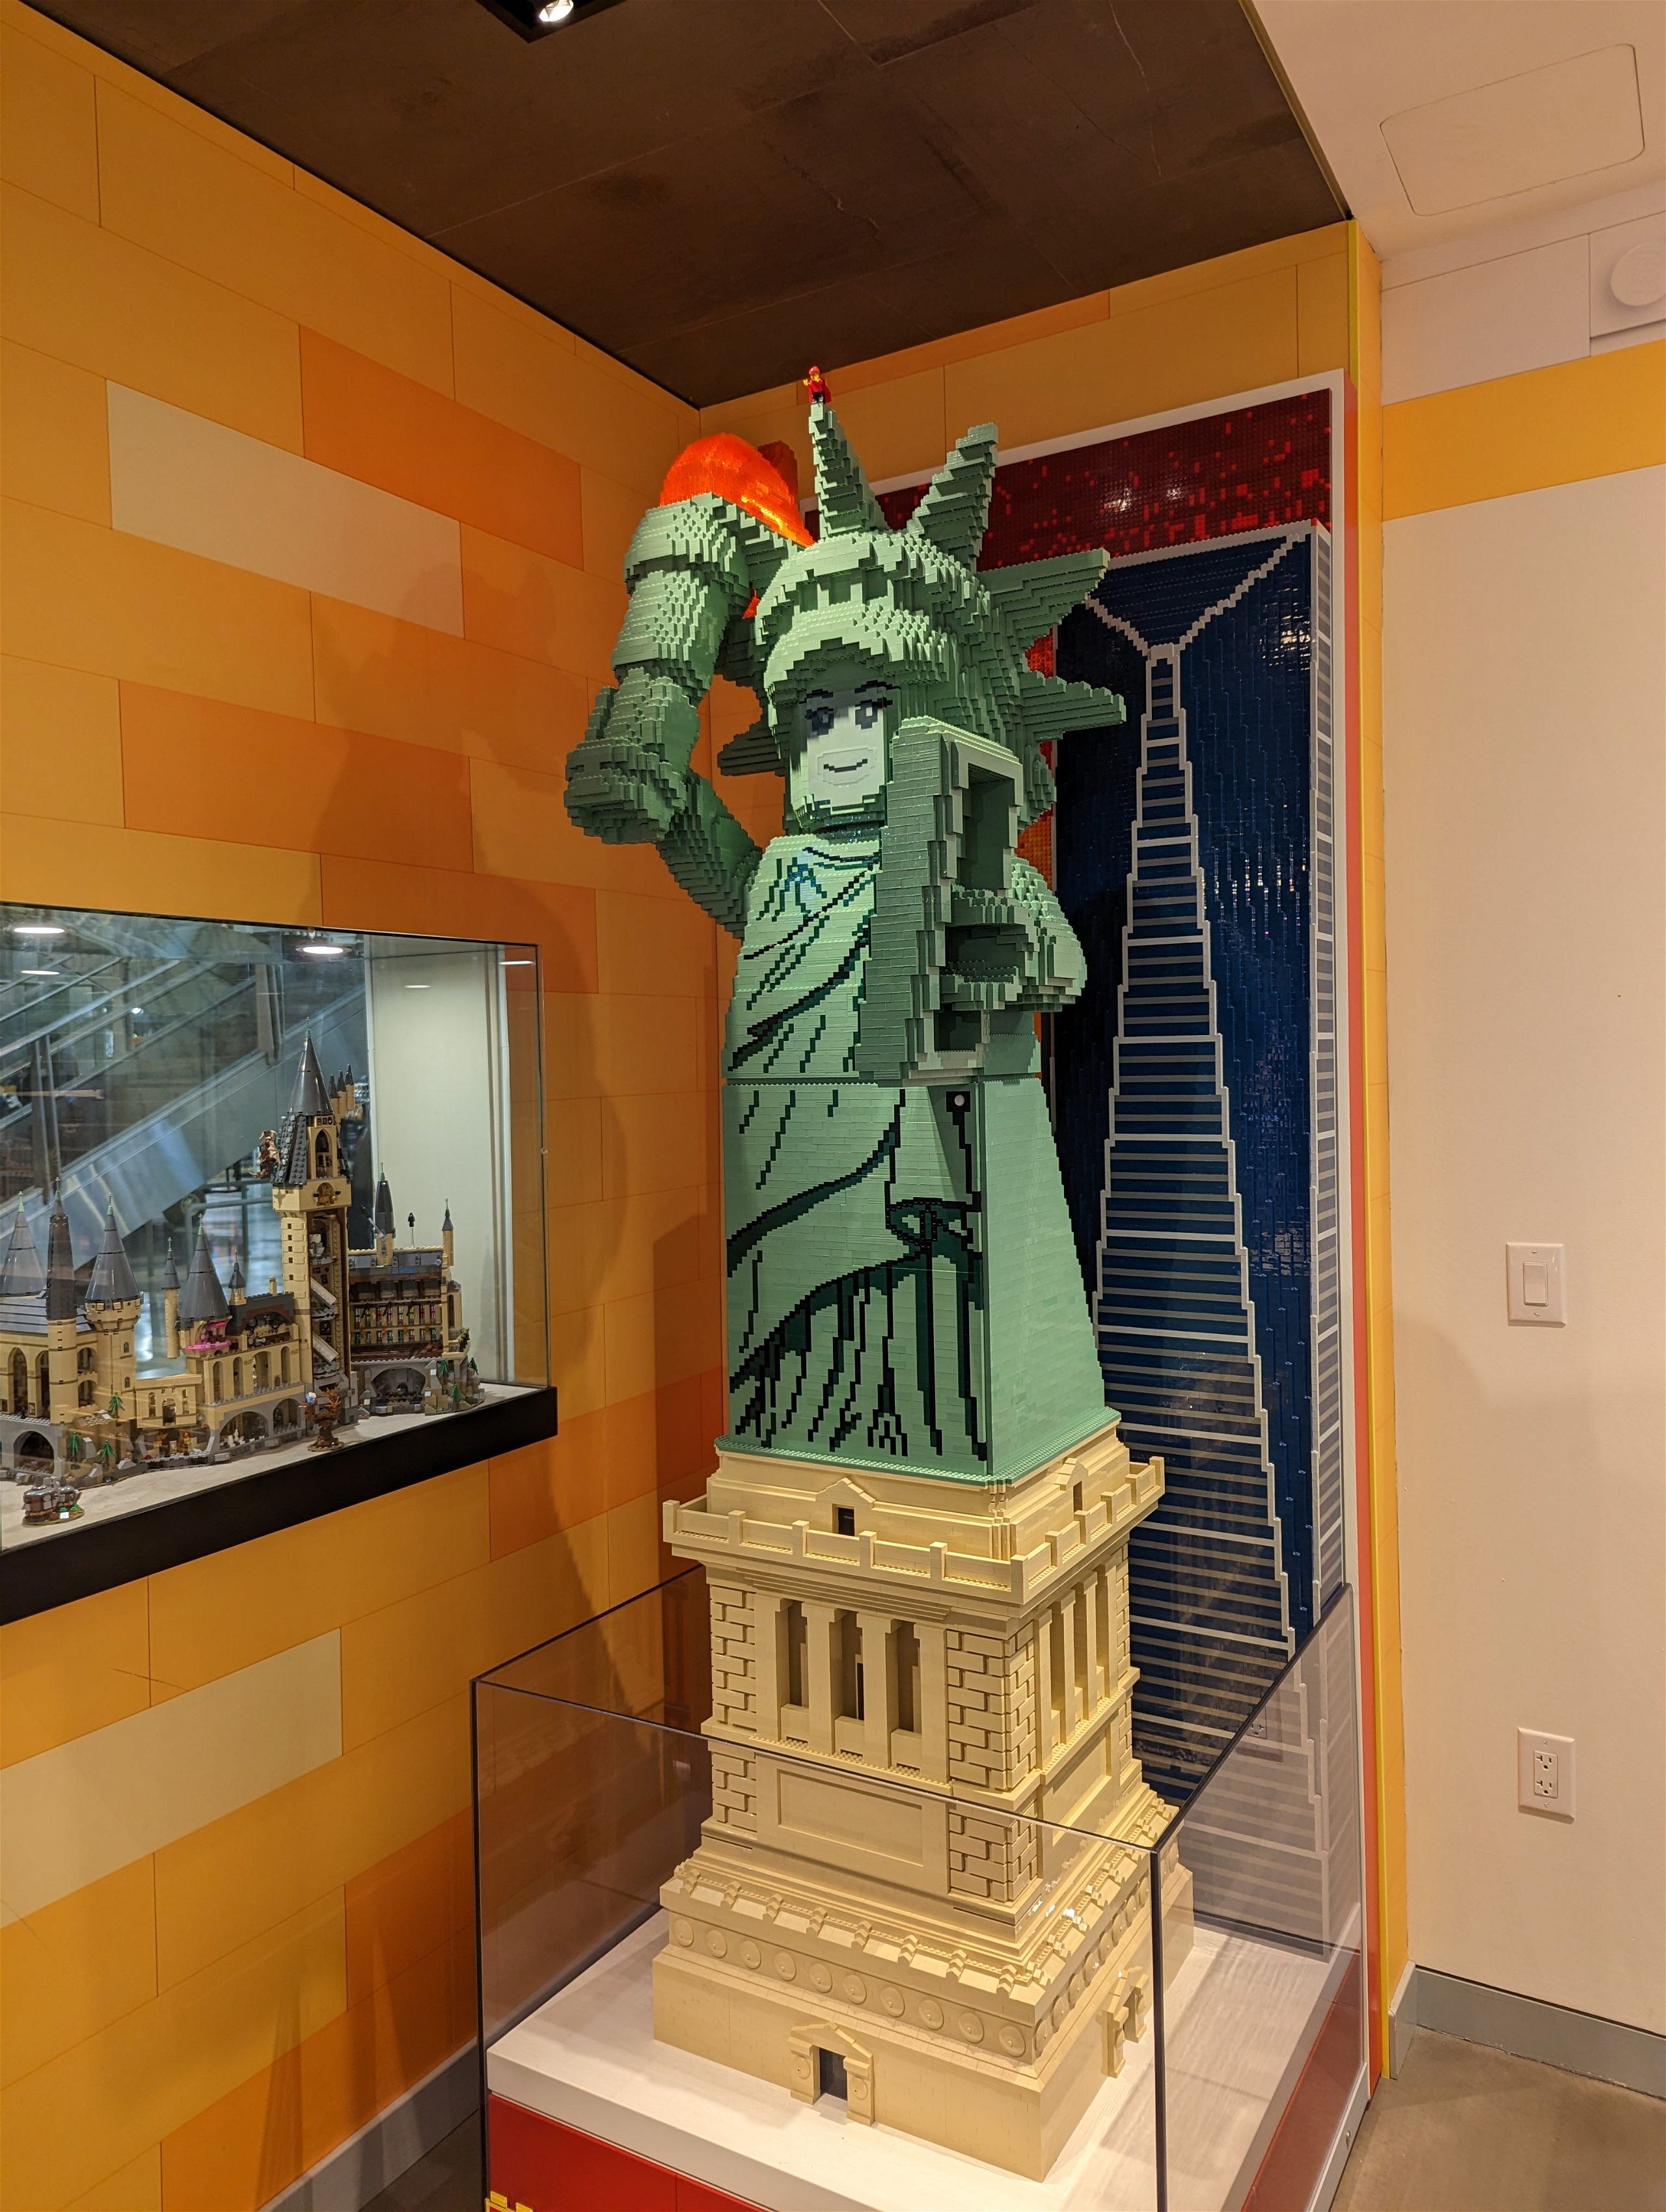 A LEGO statue of liberty